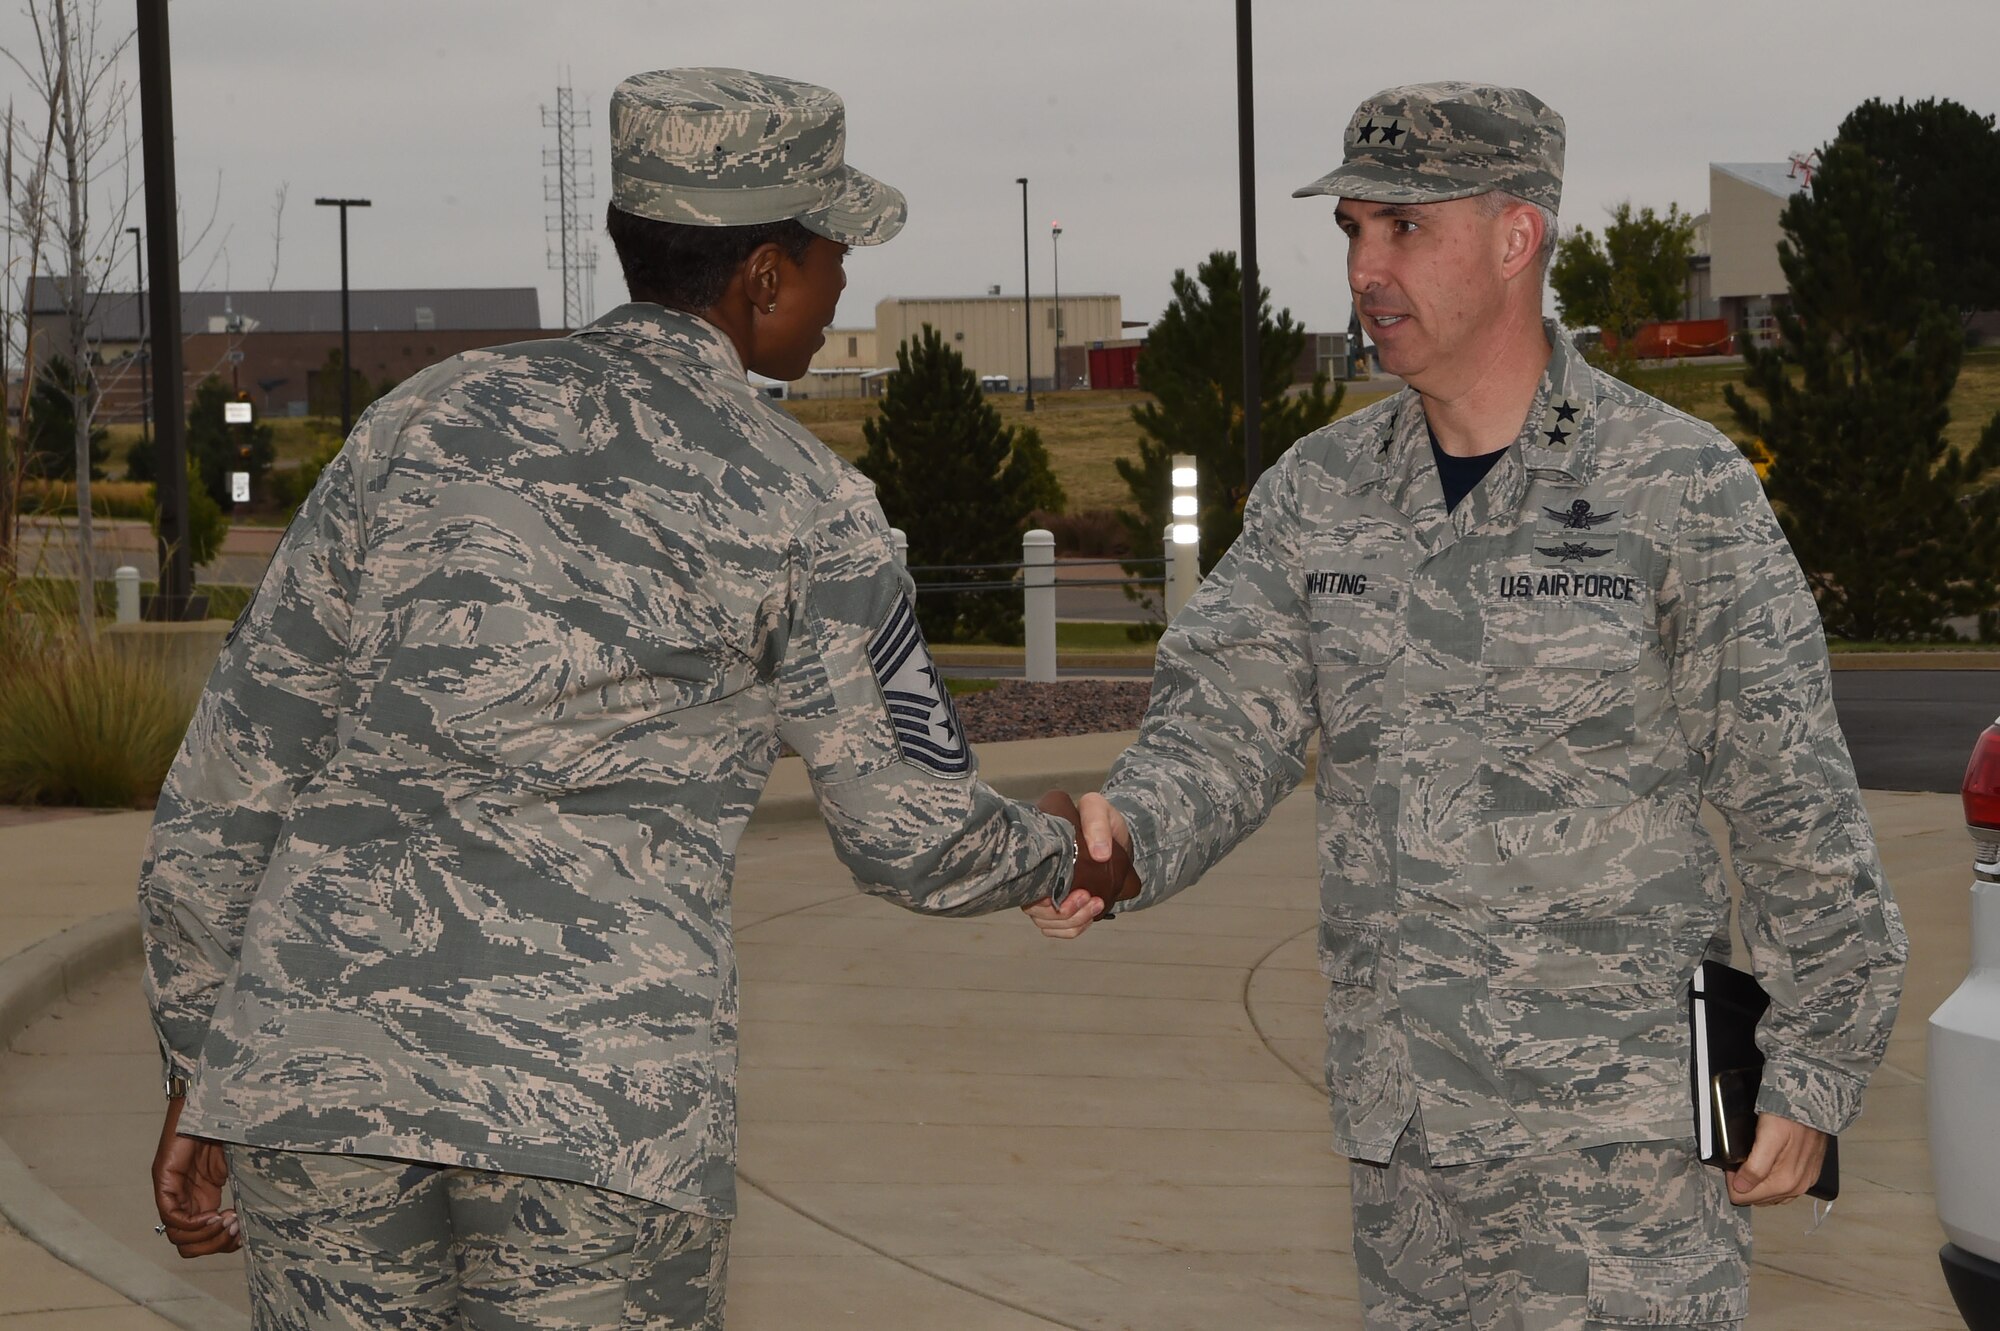 Chief Master Sgt. Tamar Dennis, 460th Space Wing command chief, greets Maj. Gen. Stephen Whiting, 14th Air Force commander, Air Force Space Command Sept. 28, 2018, on Buckley Air Force Base, Colorado. Whiting is responsible for leading and guiding a diverse team of Airmen charged with protecting and defending critical U.S. and allied space capabilities. (U.S. Air Force photo by Senior Airman Codie Collins)